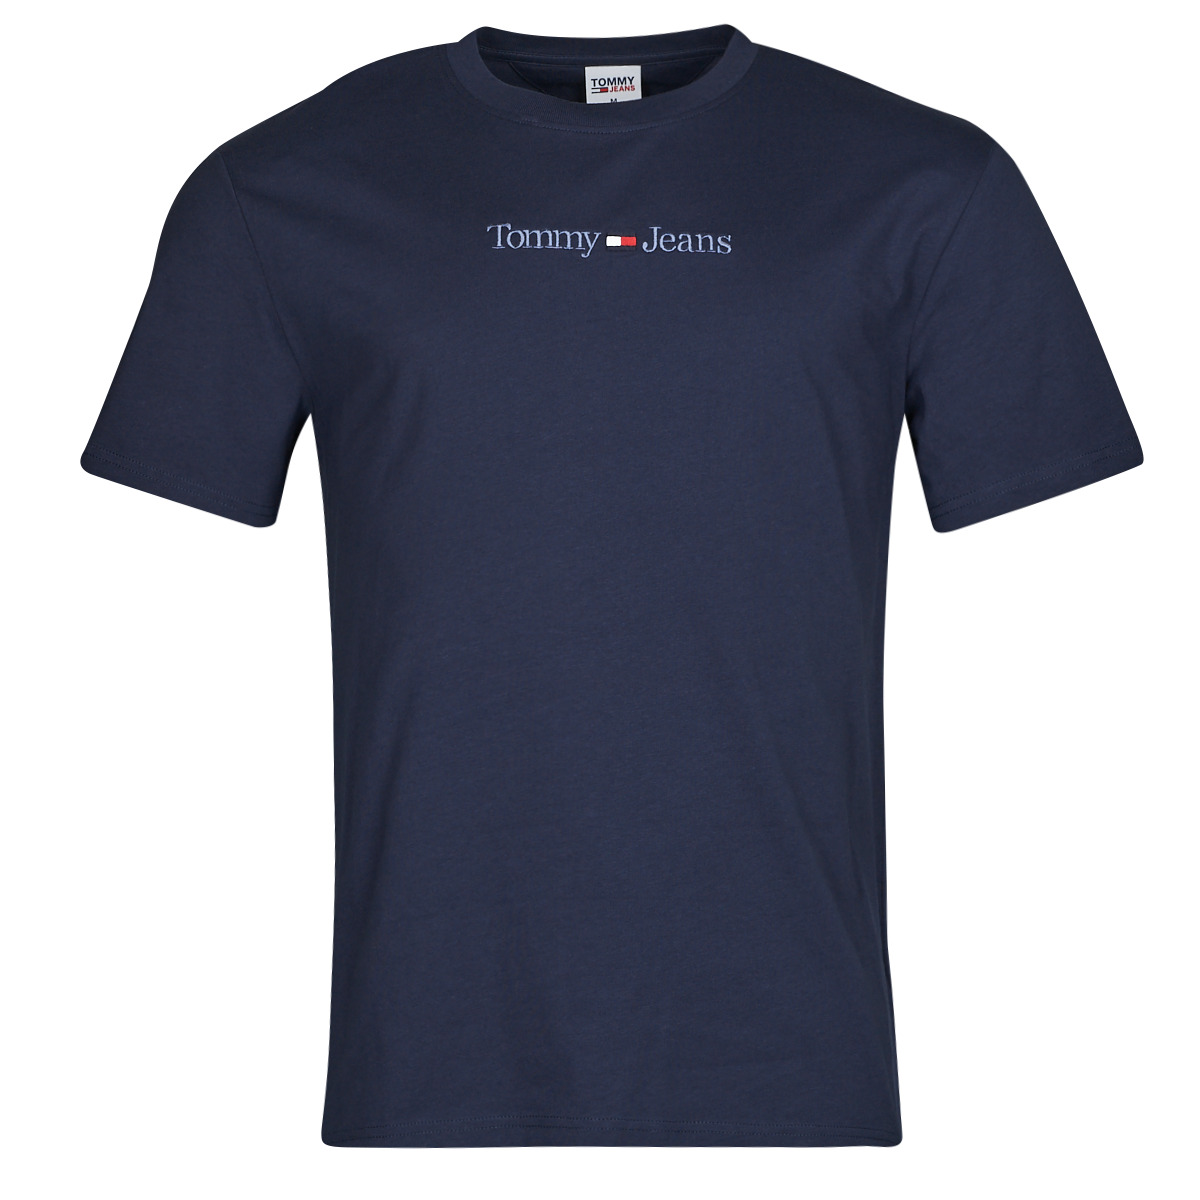 Tommy Jeans TJM CLSC SMALL TEXT TEE Marine - Free delivery | Spartoo NET !  - Clothing short-sleeved t-shirts Men